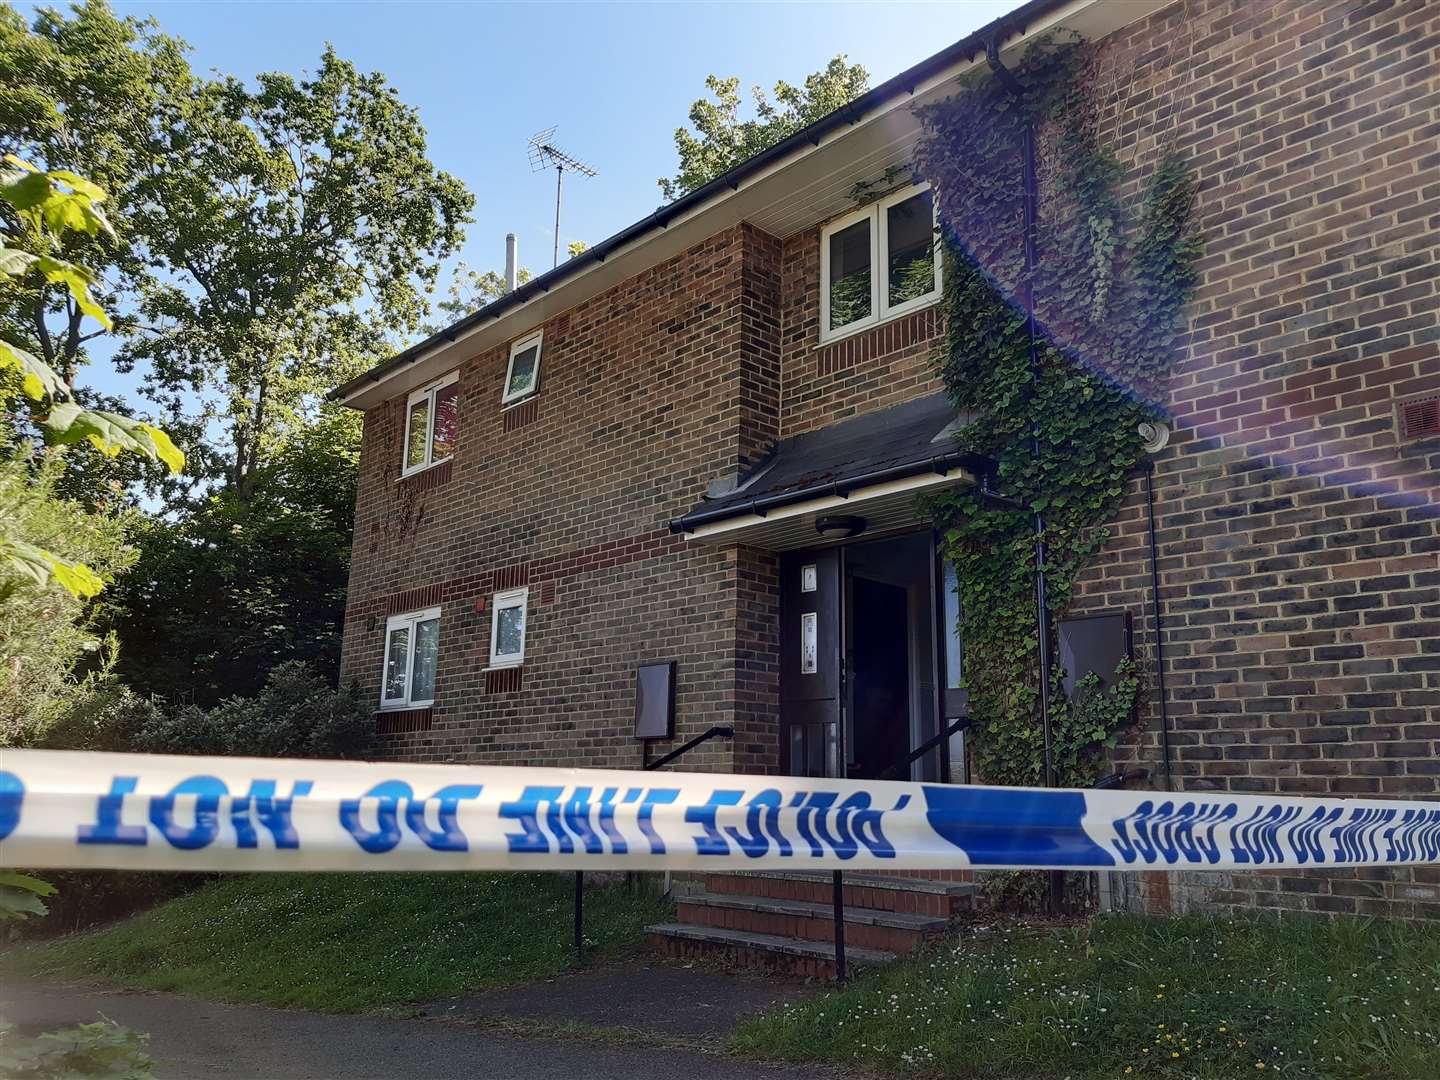 Police are focusing their work on a ground floor flat in Grampion Close